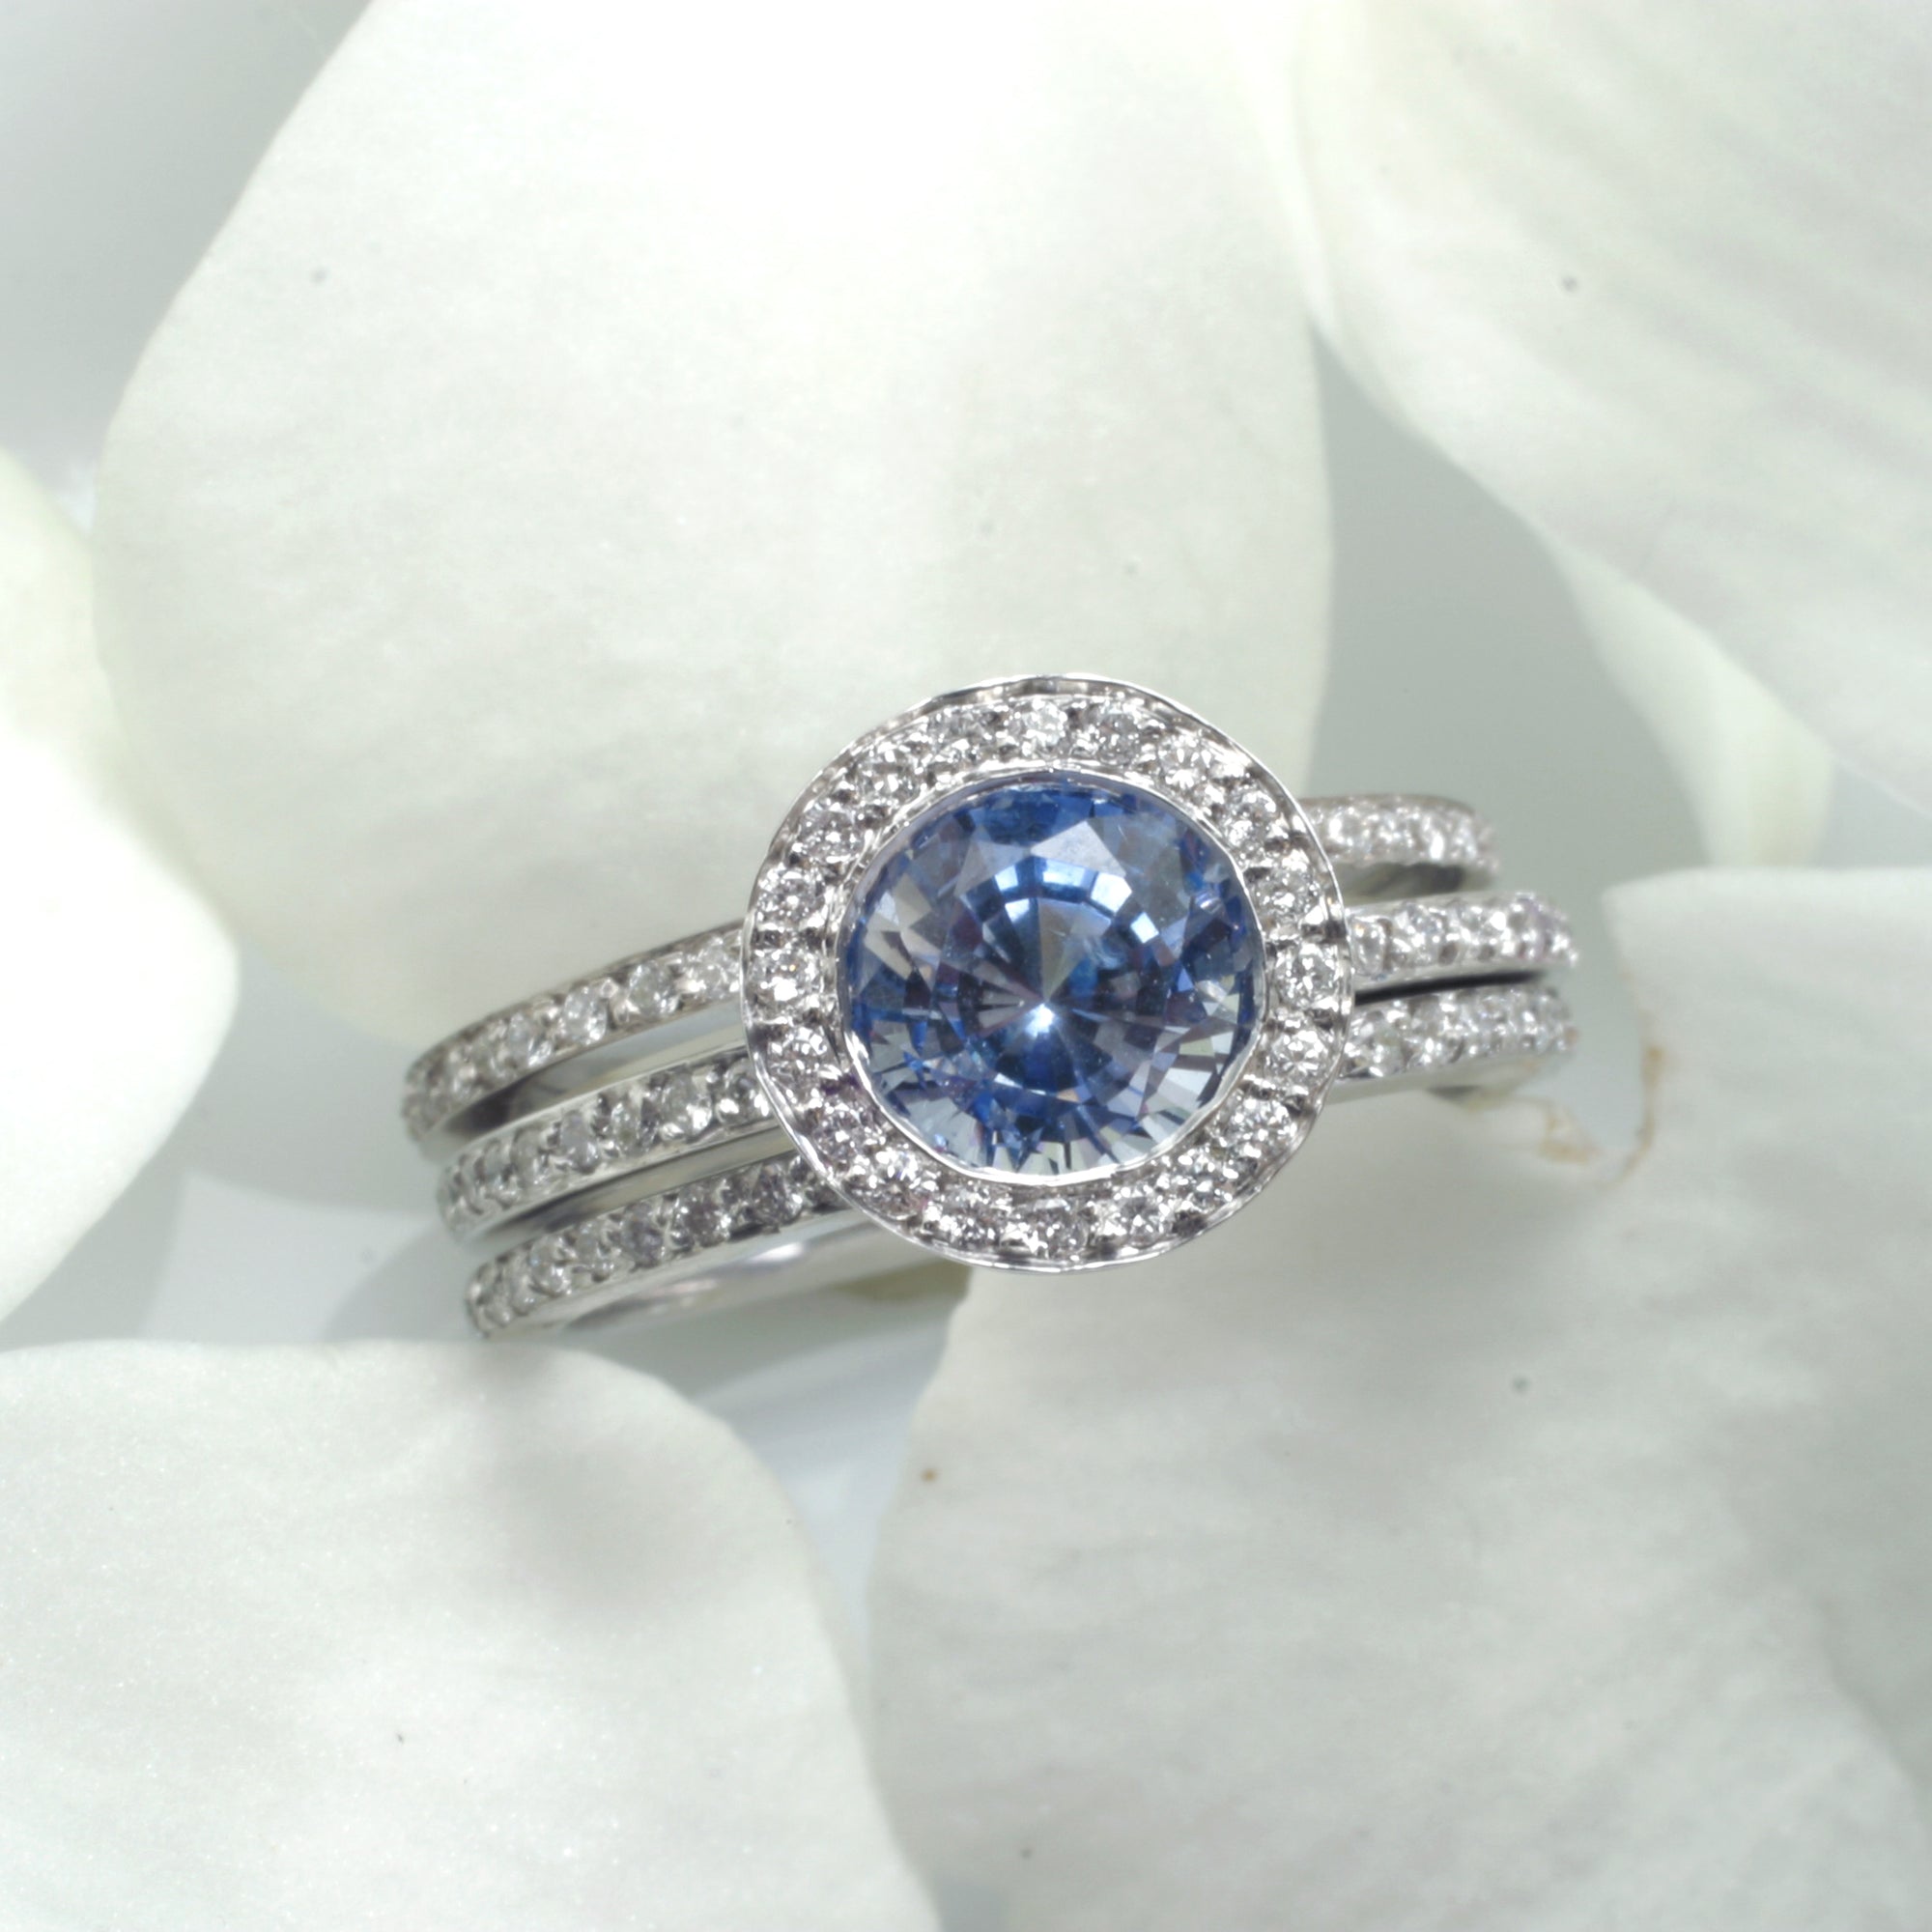 14K white gold sapphire engagement ring featuring 1 round ceylon blue sapphire bezel set in diamond halo in a full diamond eternity design. Available with a matching diamond eternity wedding band (ring guards). Judith Arnell Jewelers